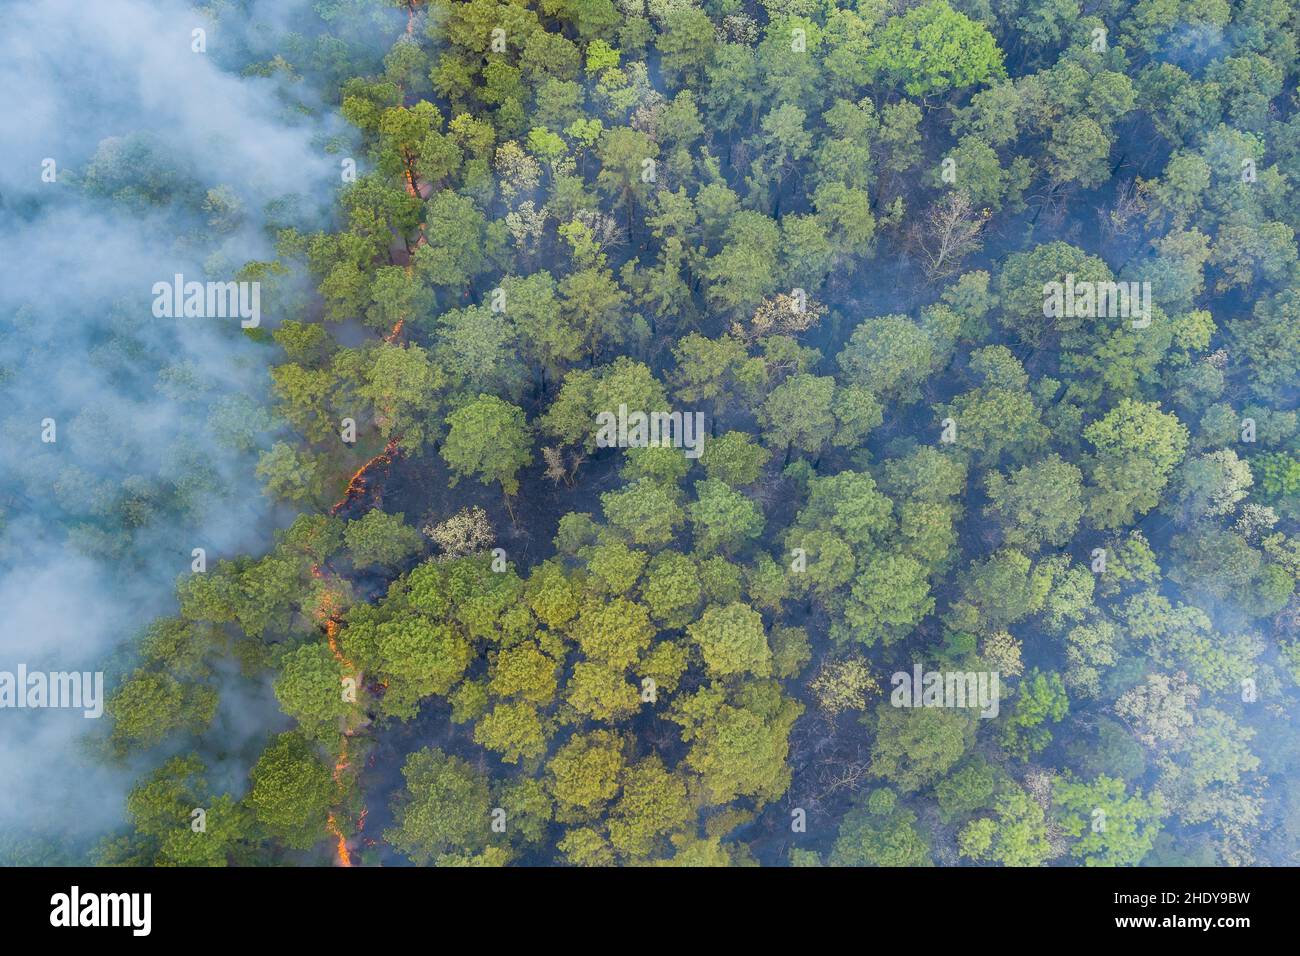 forest, fire, fug, forests, wood, woodland, woods, fires, fugs Stock Photo